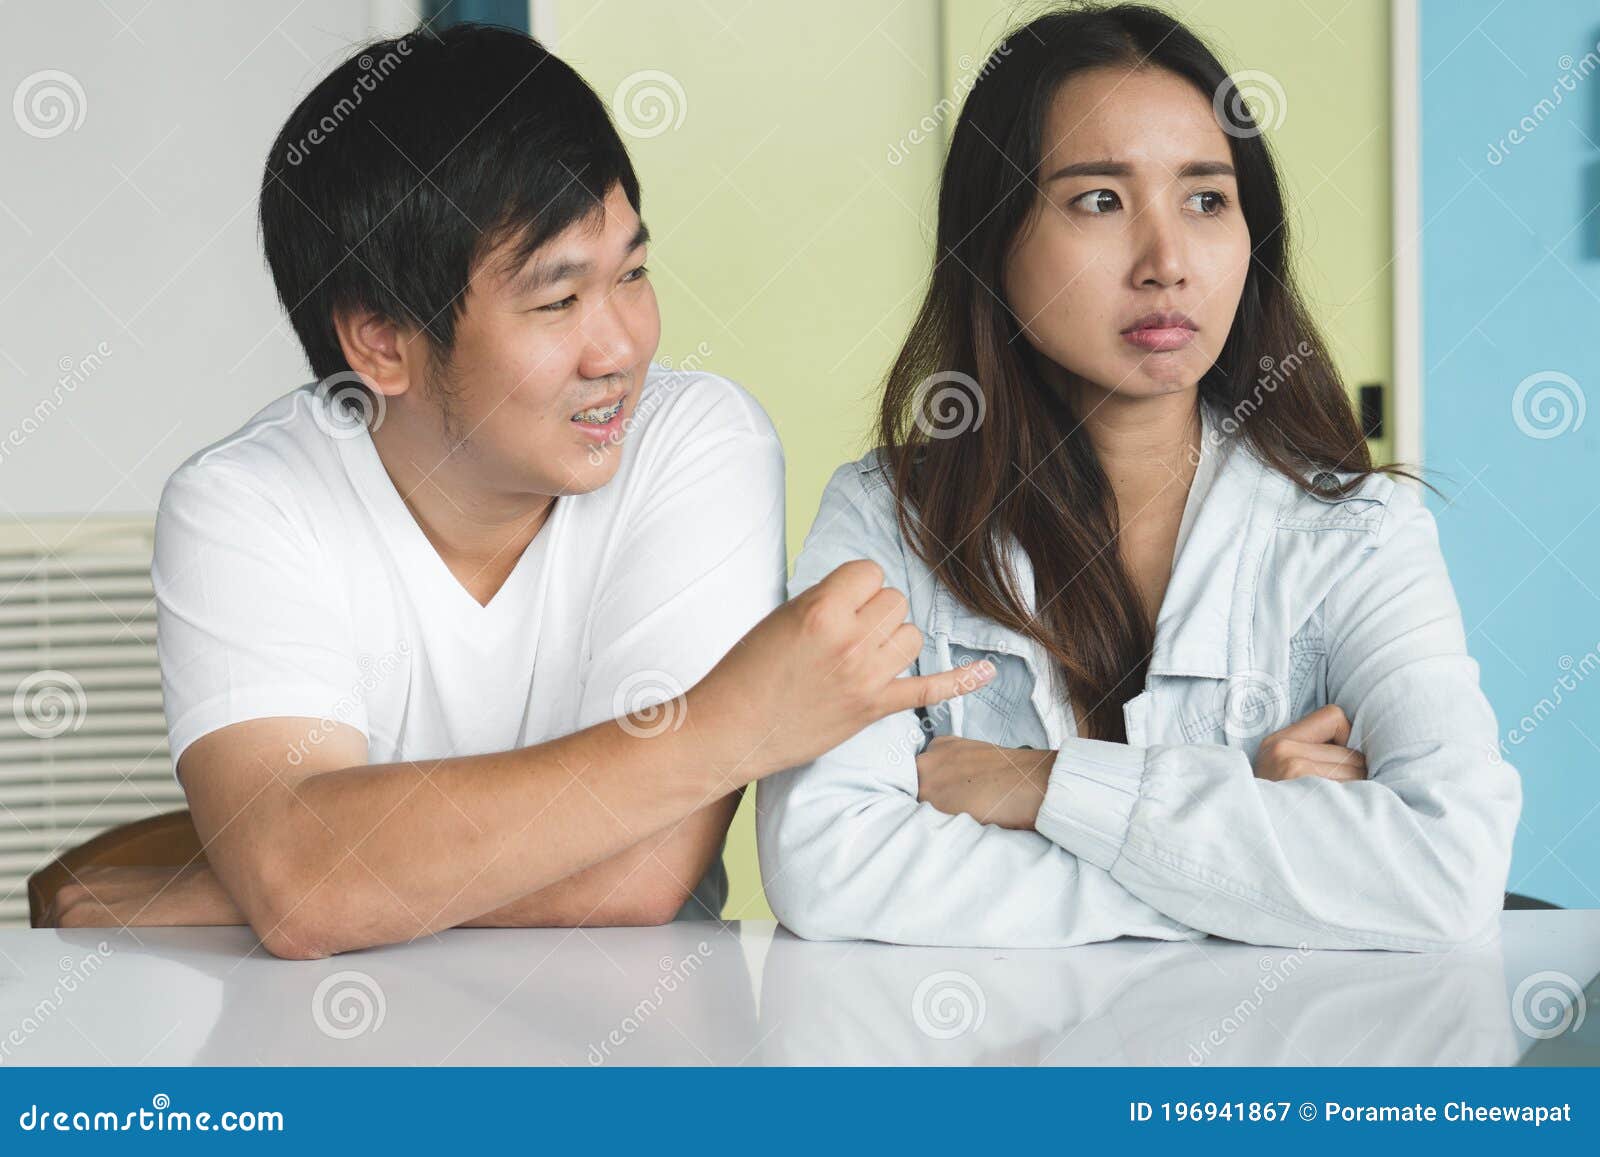 Asian Young Girl Friend Angry At Boyfriend Playing Online Game On Computer.  Mad Female Pushing Guy And Scolding At Him. Frowning Man Ignores His  Annoyed Lover And Wearing Headphones Keep Having Fun.